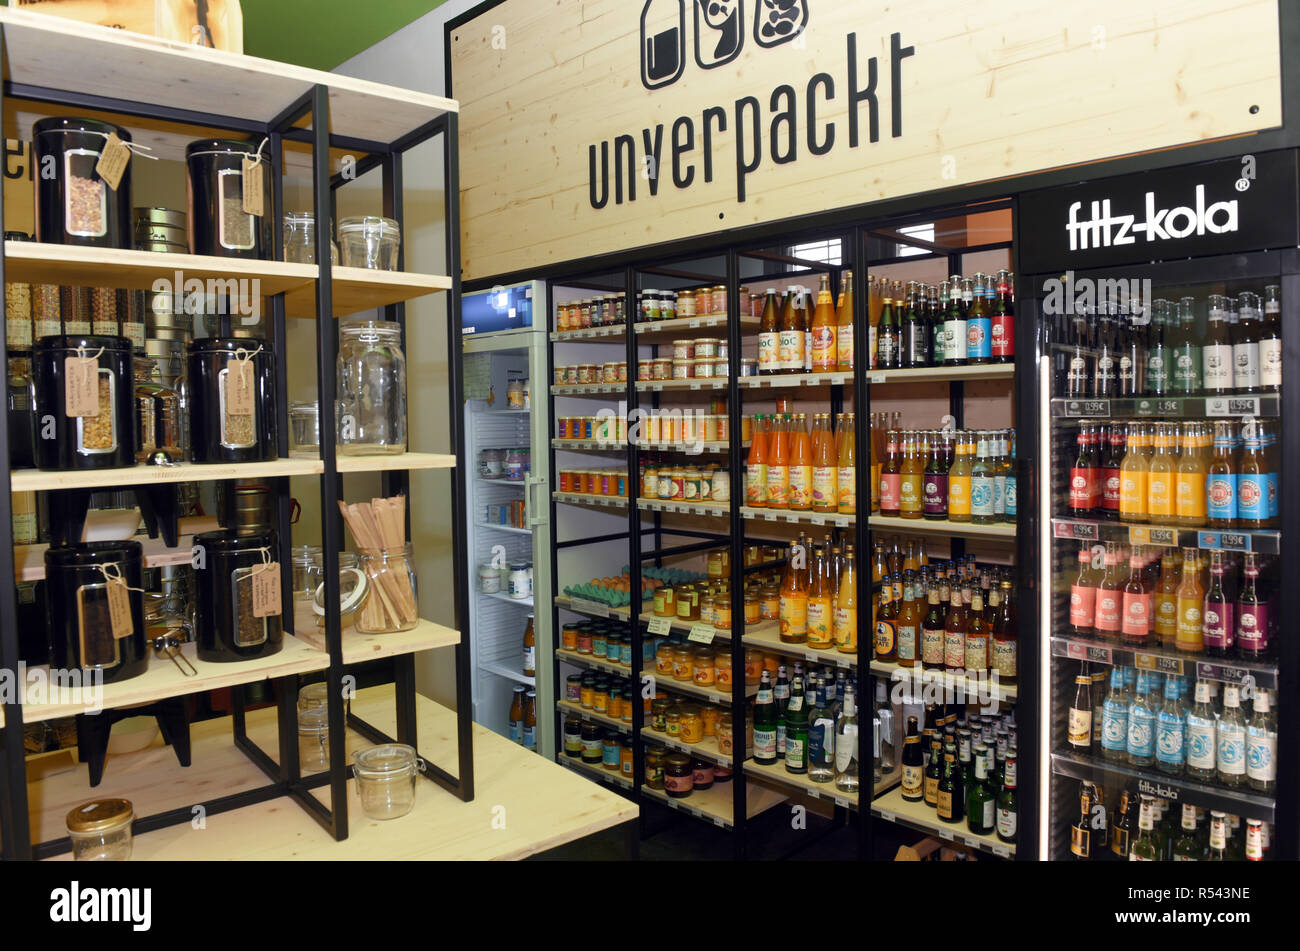 28 November 2018, North Rhine-Westphalia, Düsseldorf: Goods are stored in shelves in the store 'Unverpackt' opened a few days ago. The concept of the 'unpackaged shop' is that disposable packaging is not used in order to reduce the consumption of plastic. Customers bring their glasses or other containers with them for filling. Photo: Horst Ossinger/dpa Stock Photo